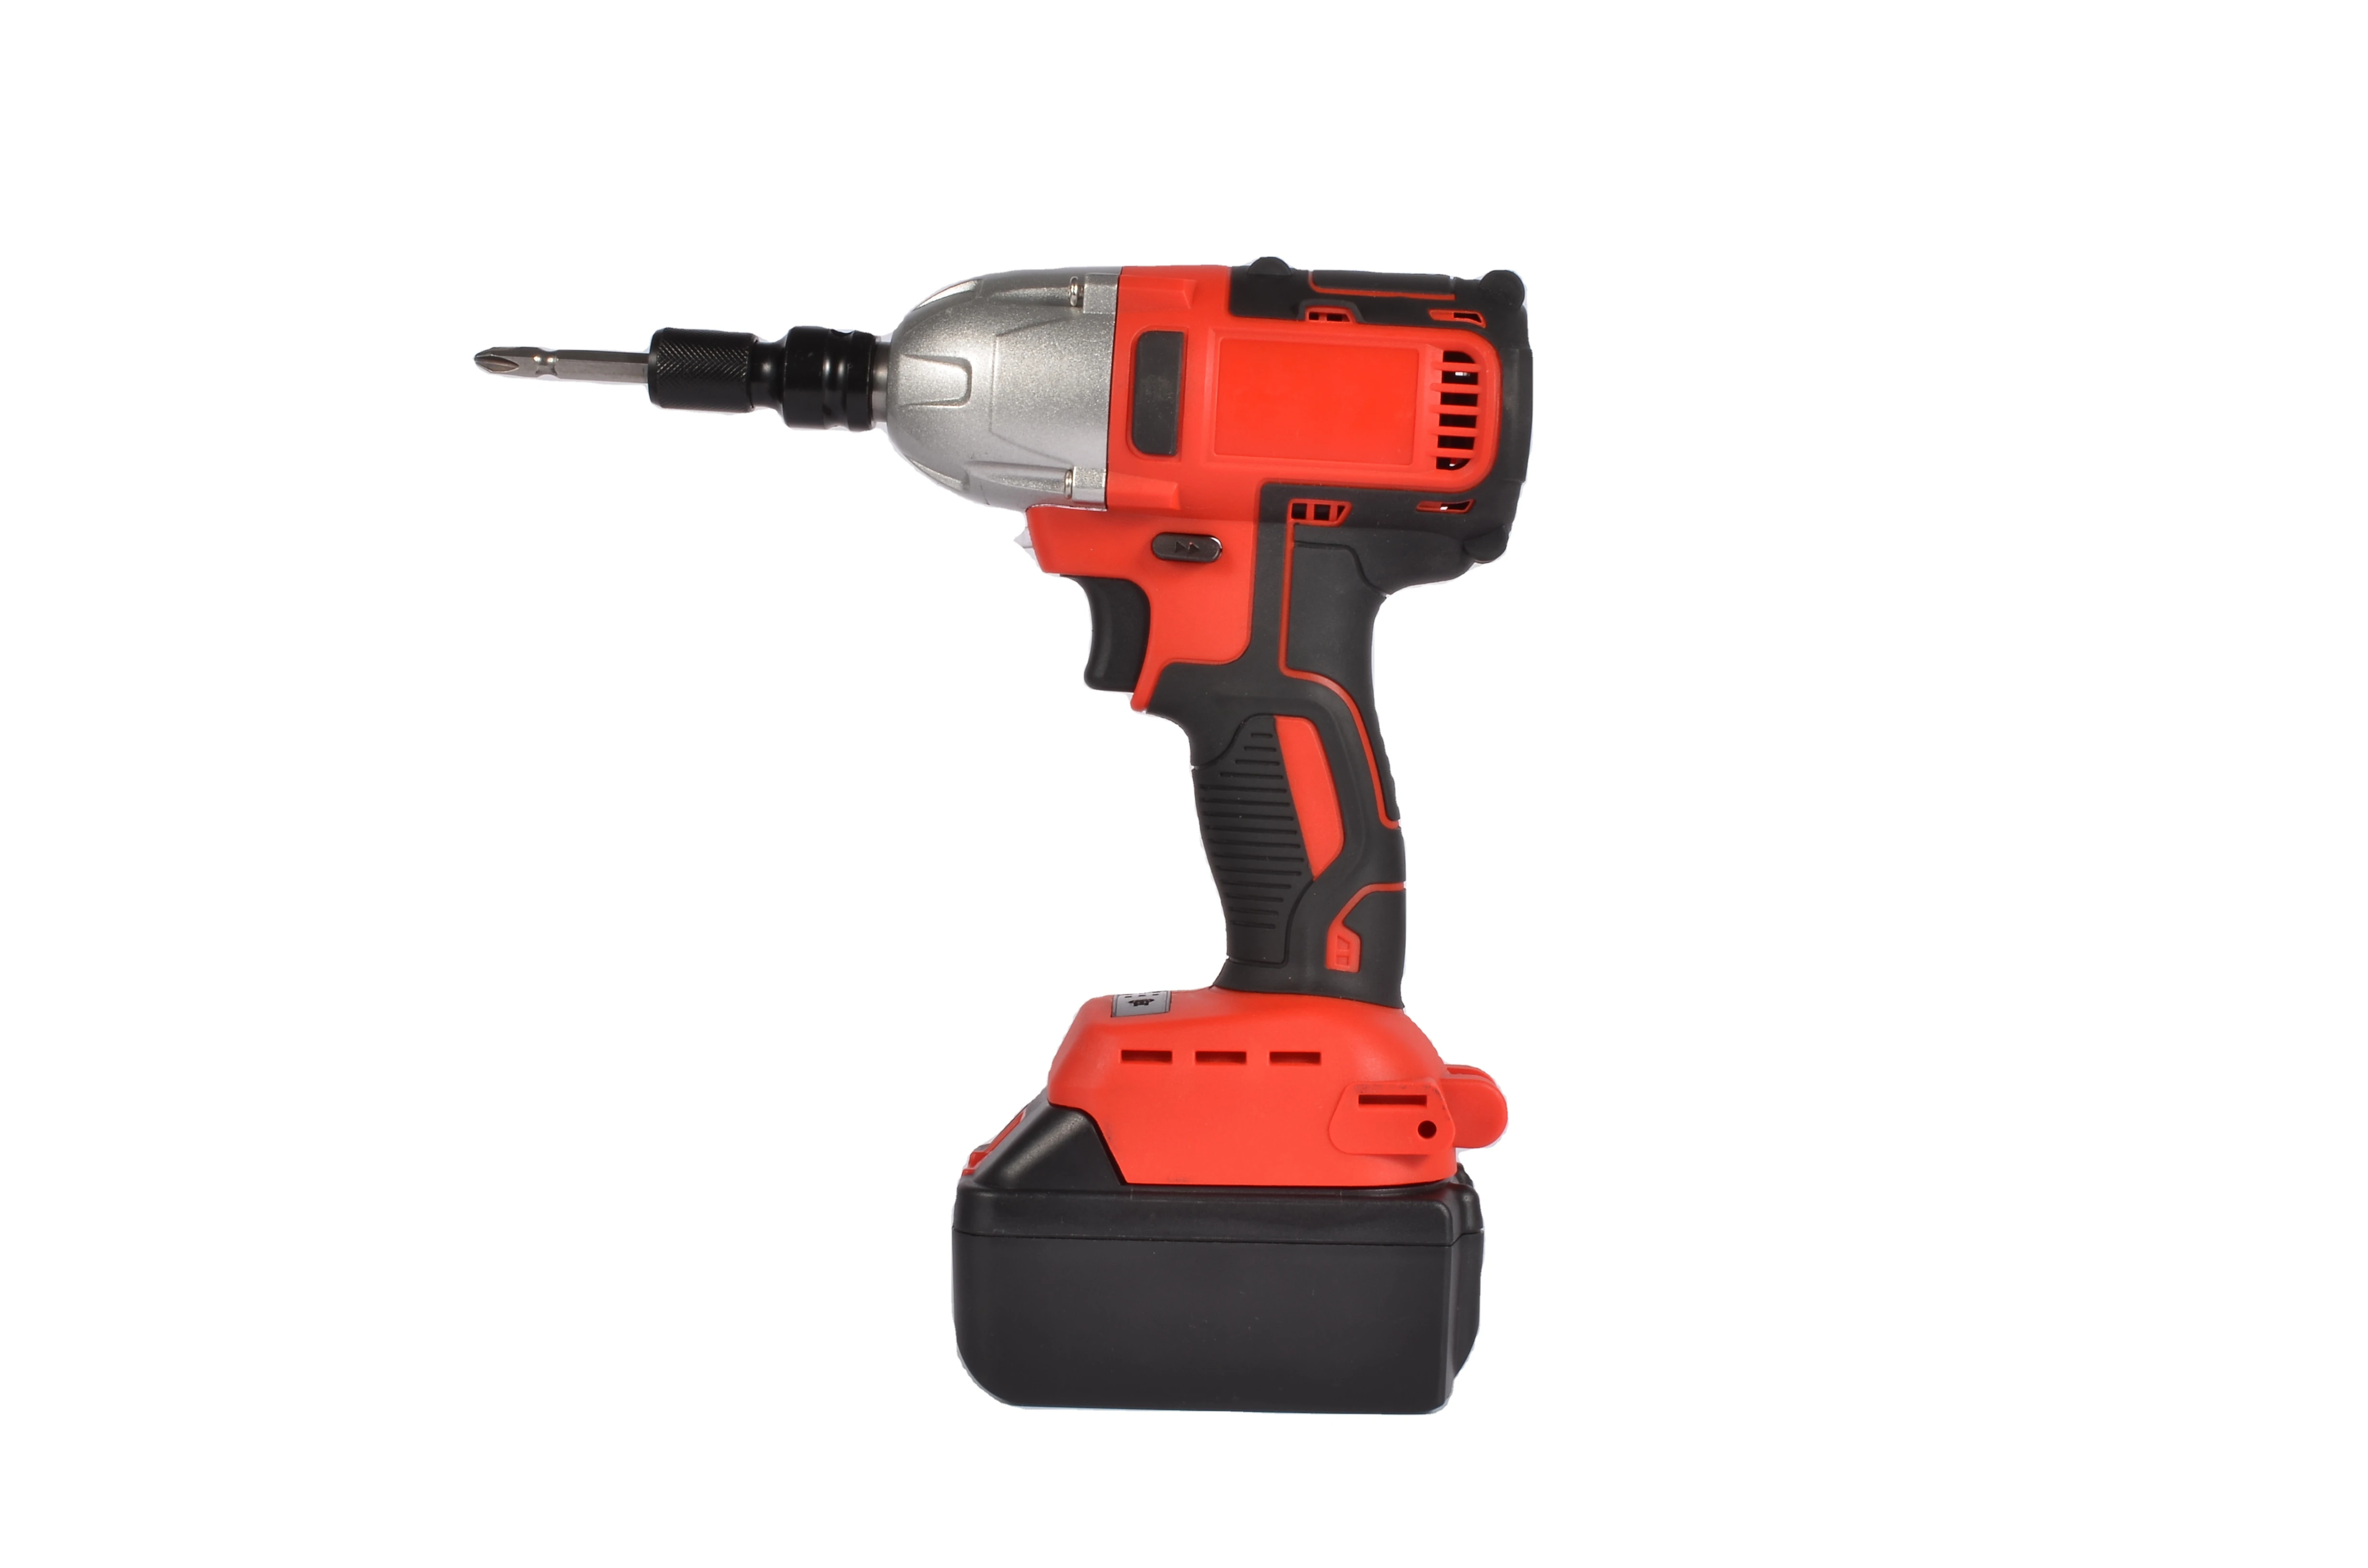 18V Brushless Cordless Impact Wrench 320N.M Electrical Tools   Cordless Power Tools Drill for Household